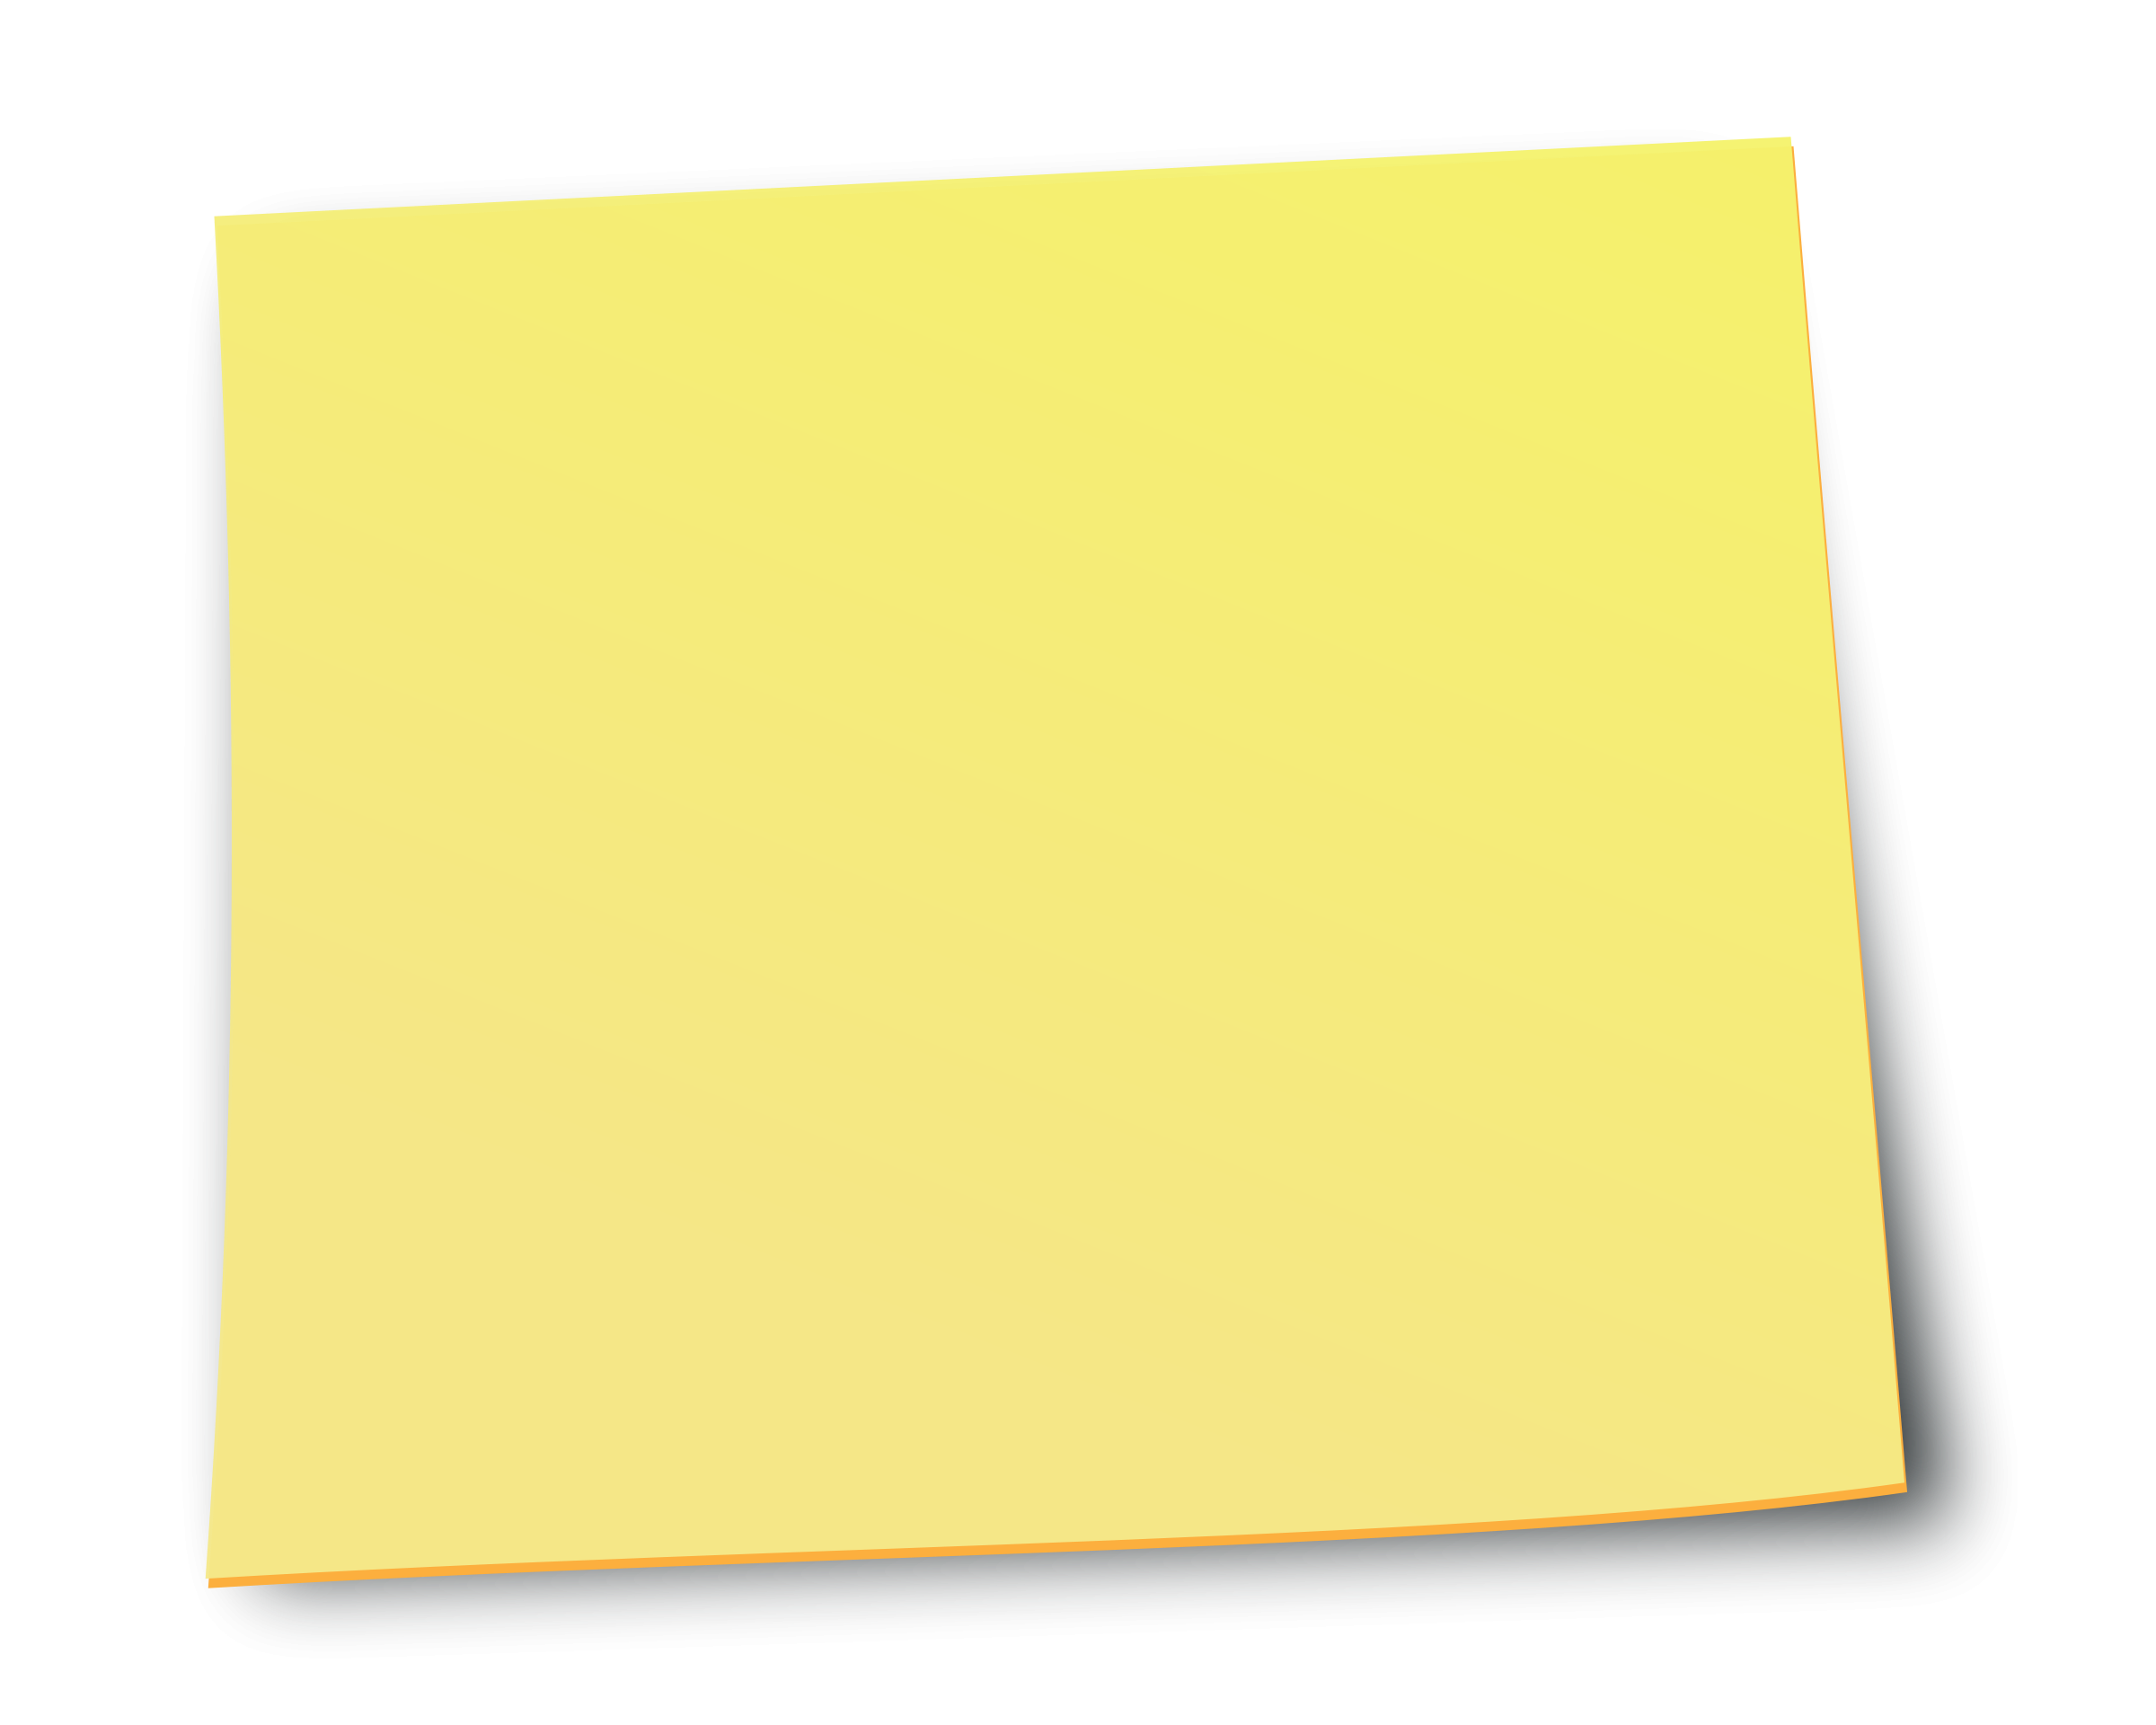 Free Sticky Note Image Download Free Sticky Note Image Png Images